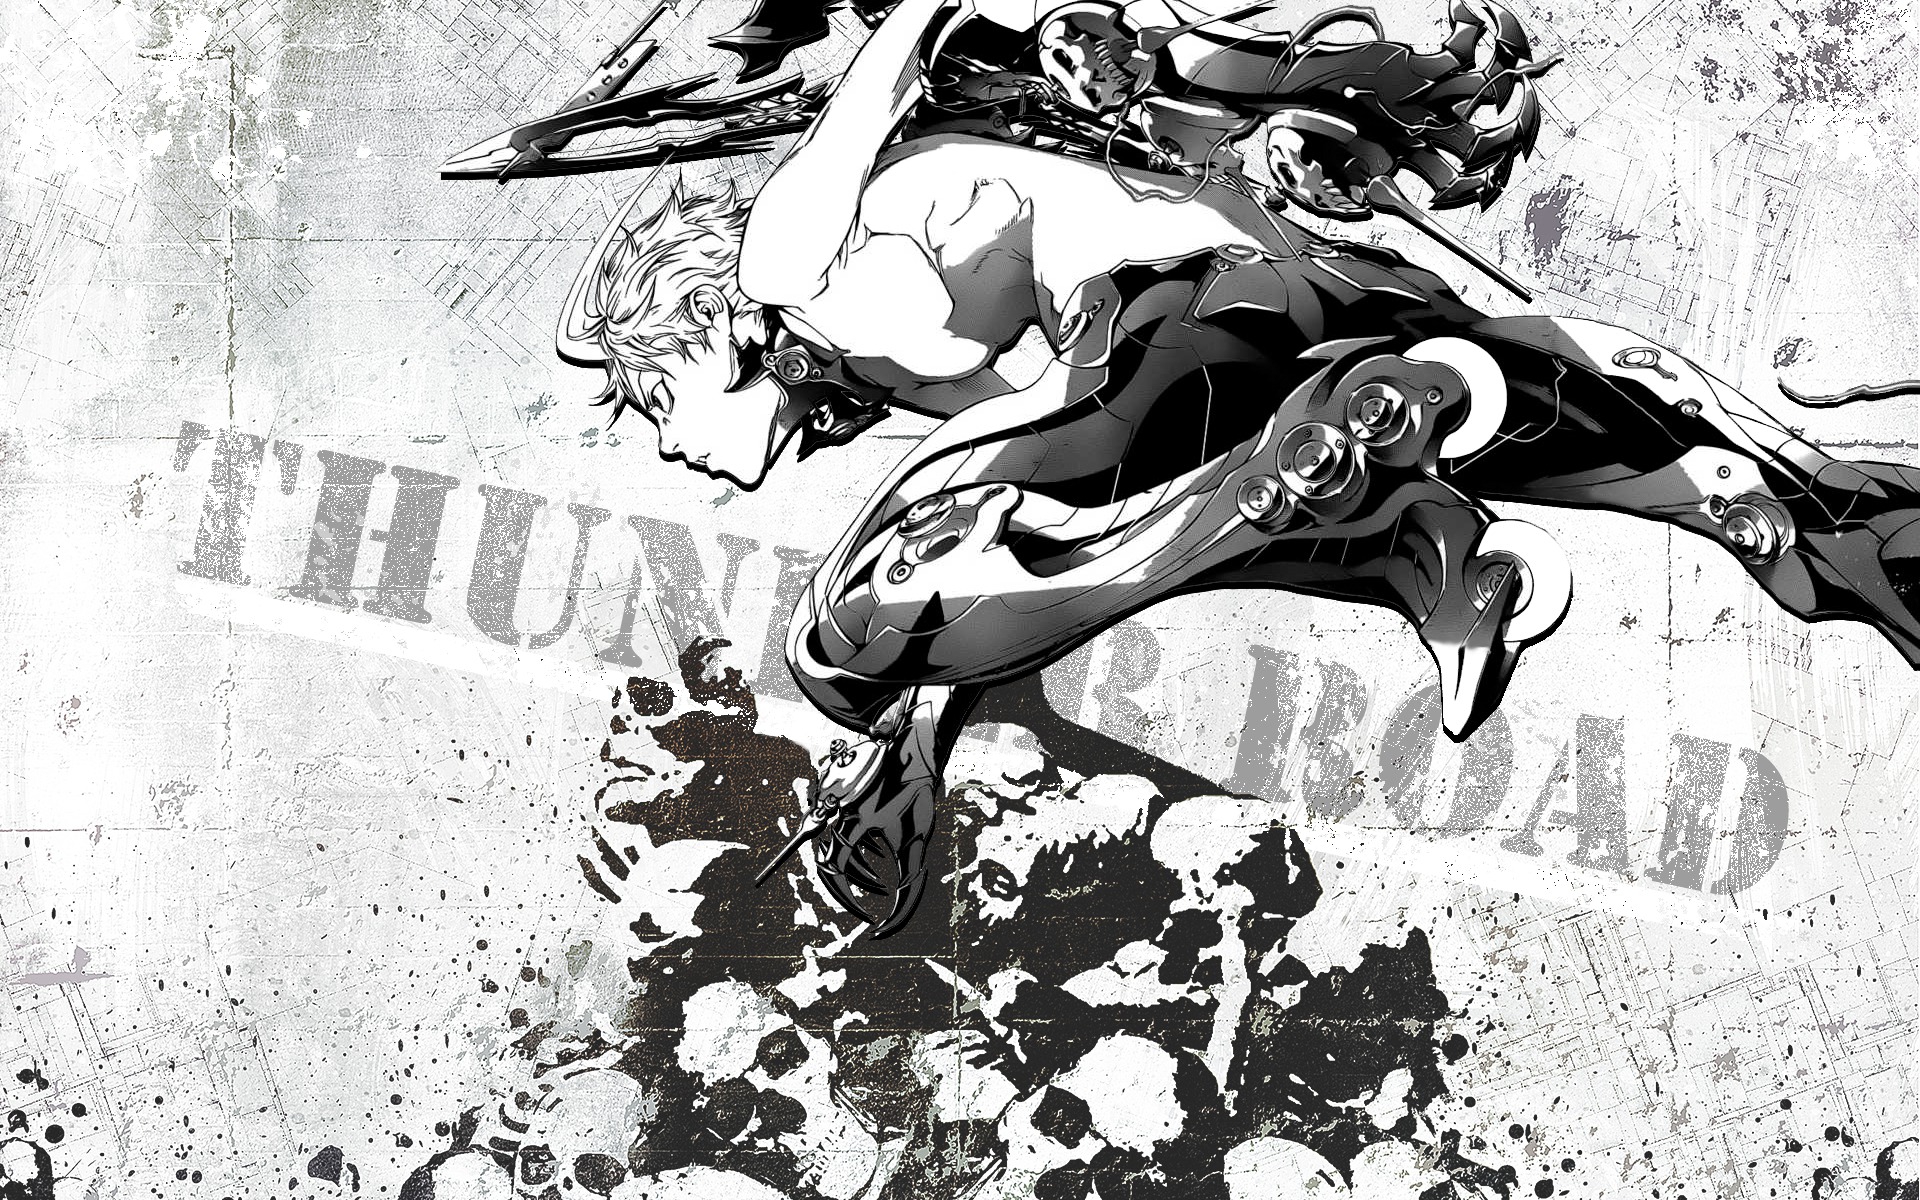 air gear wallpaper,graphic design,fictional character,black and white,illustration,monochrome